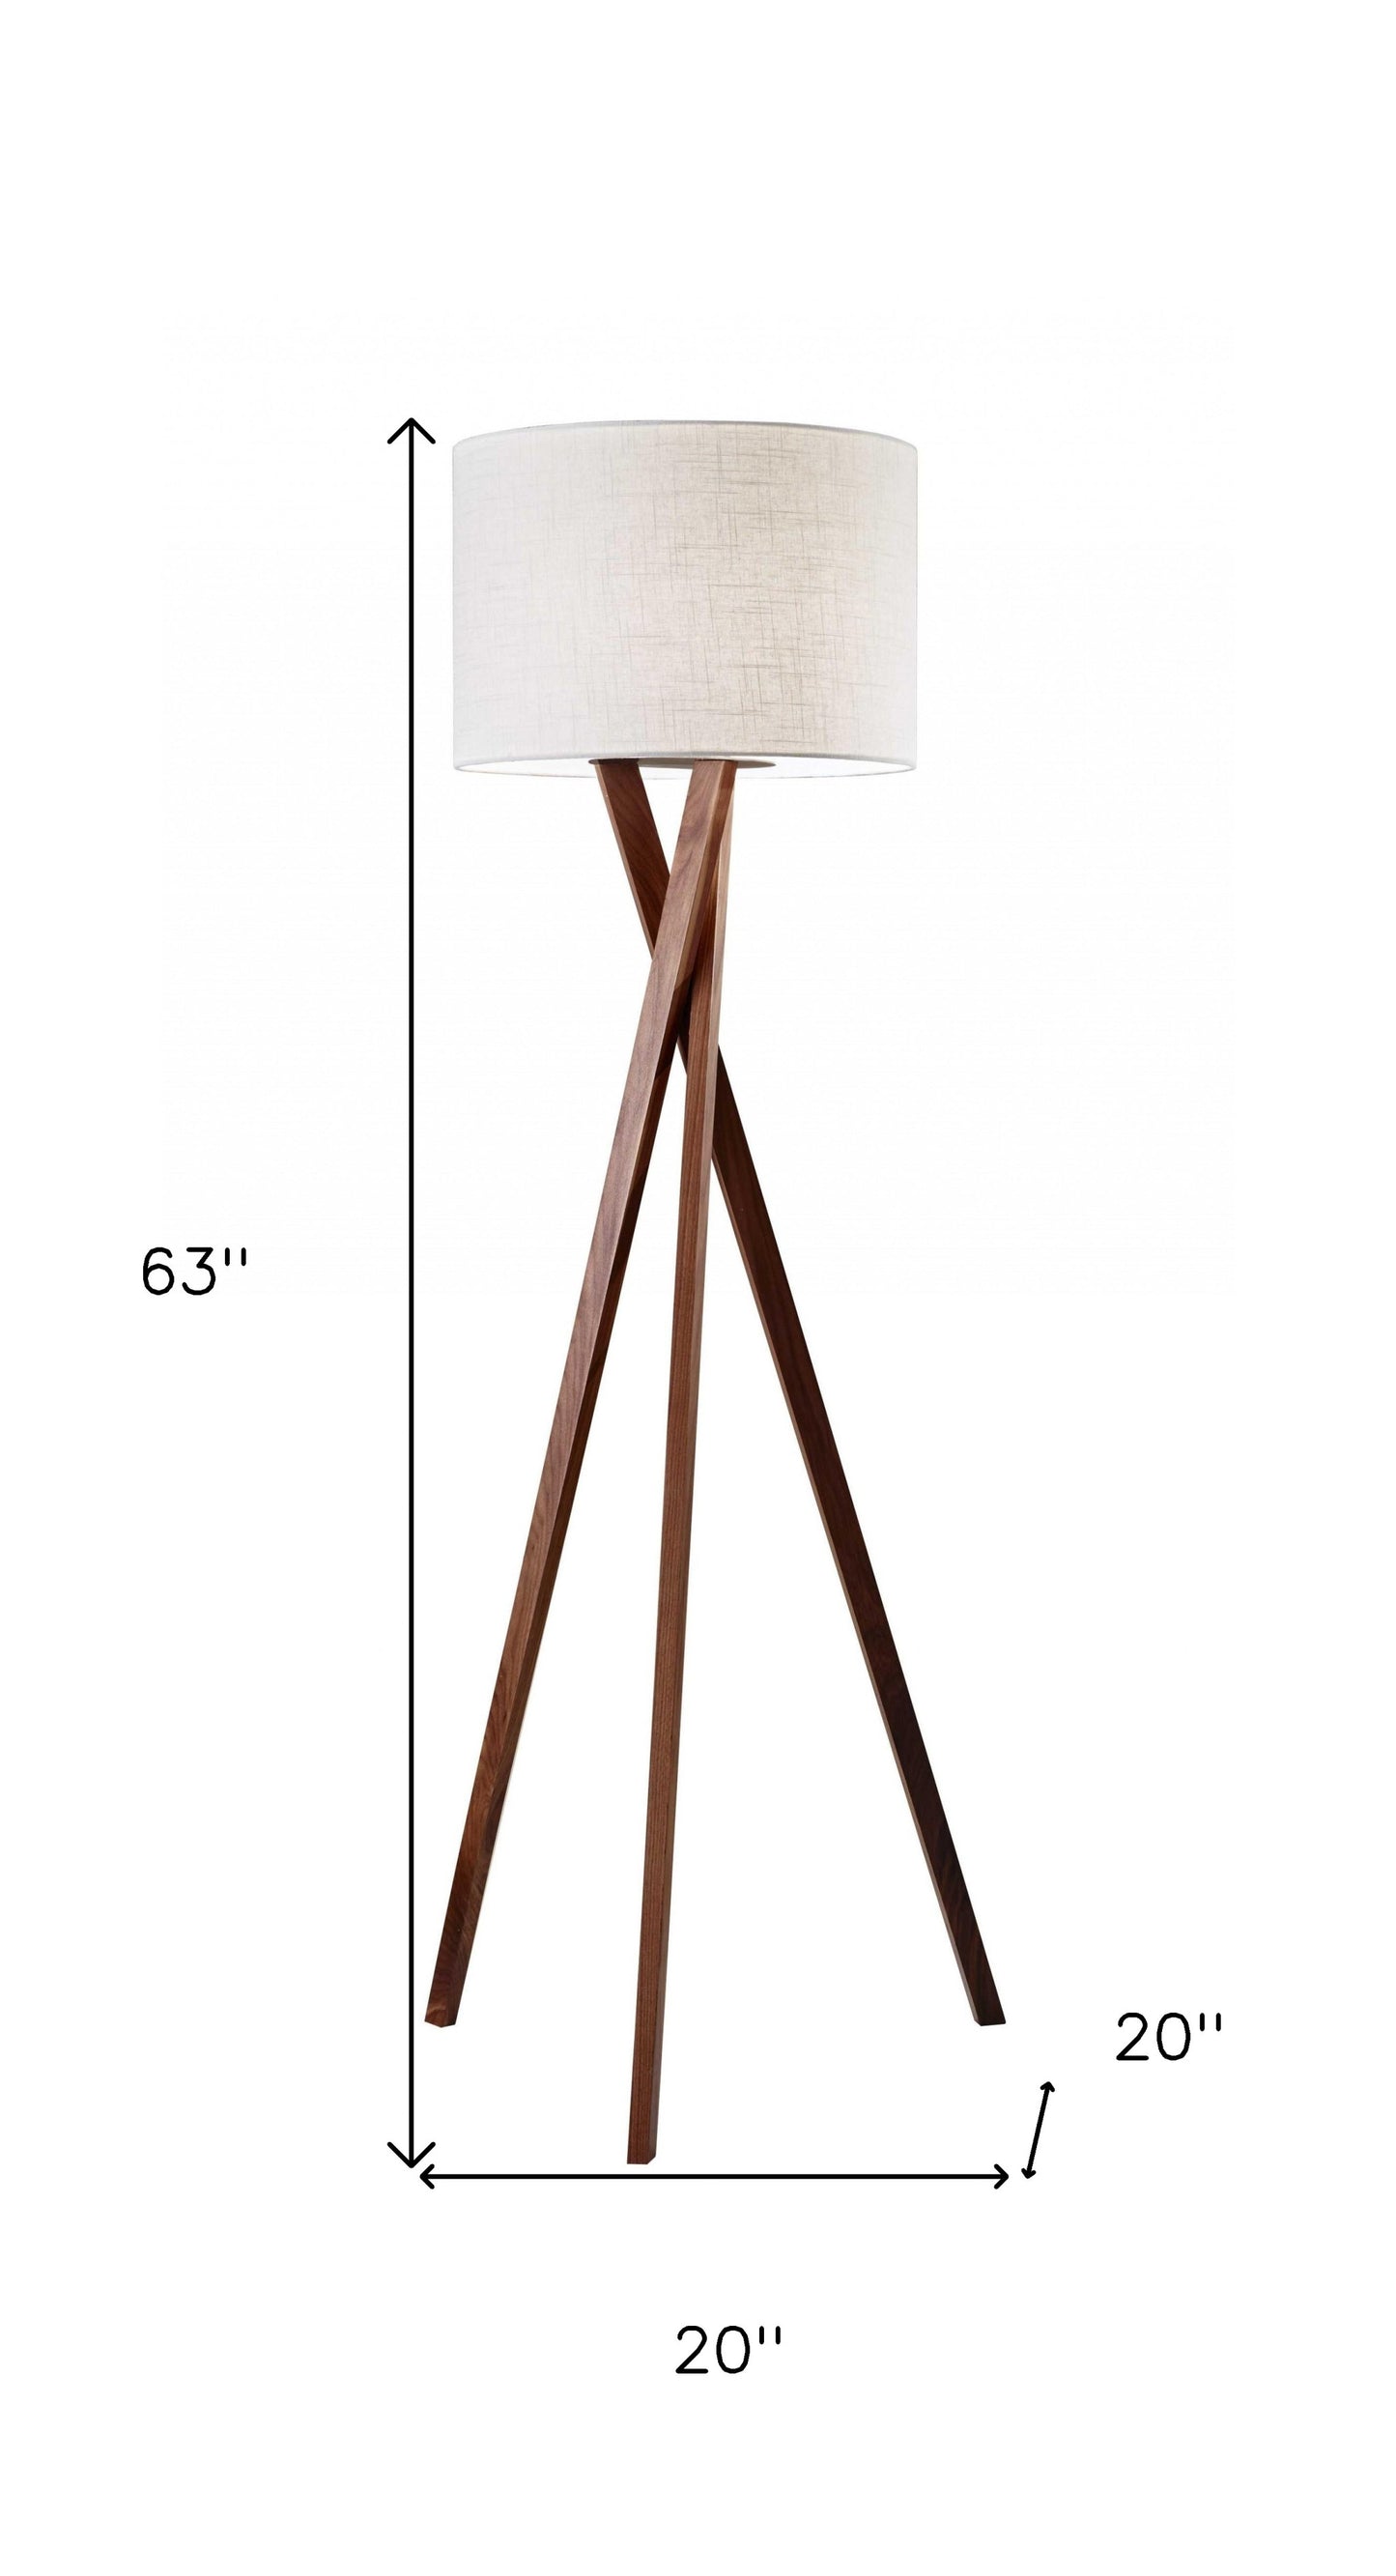 63" Solid Wood Tripod Floor Lamp With White Drum Shade